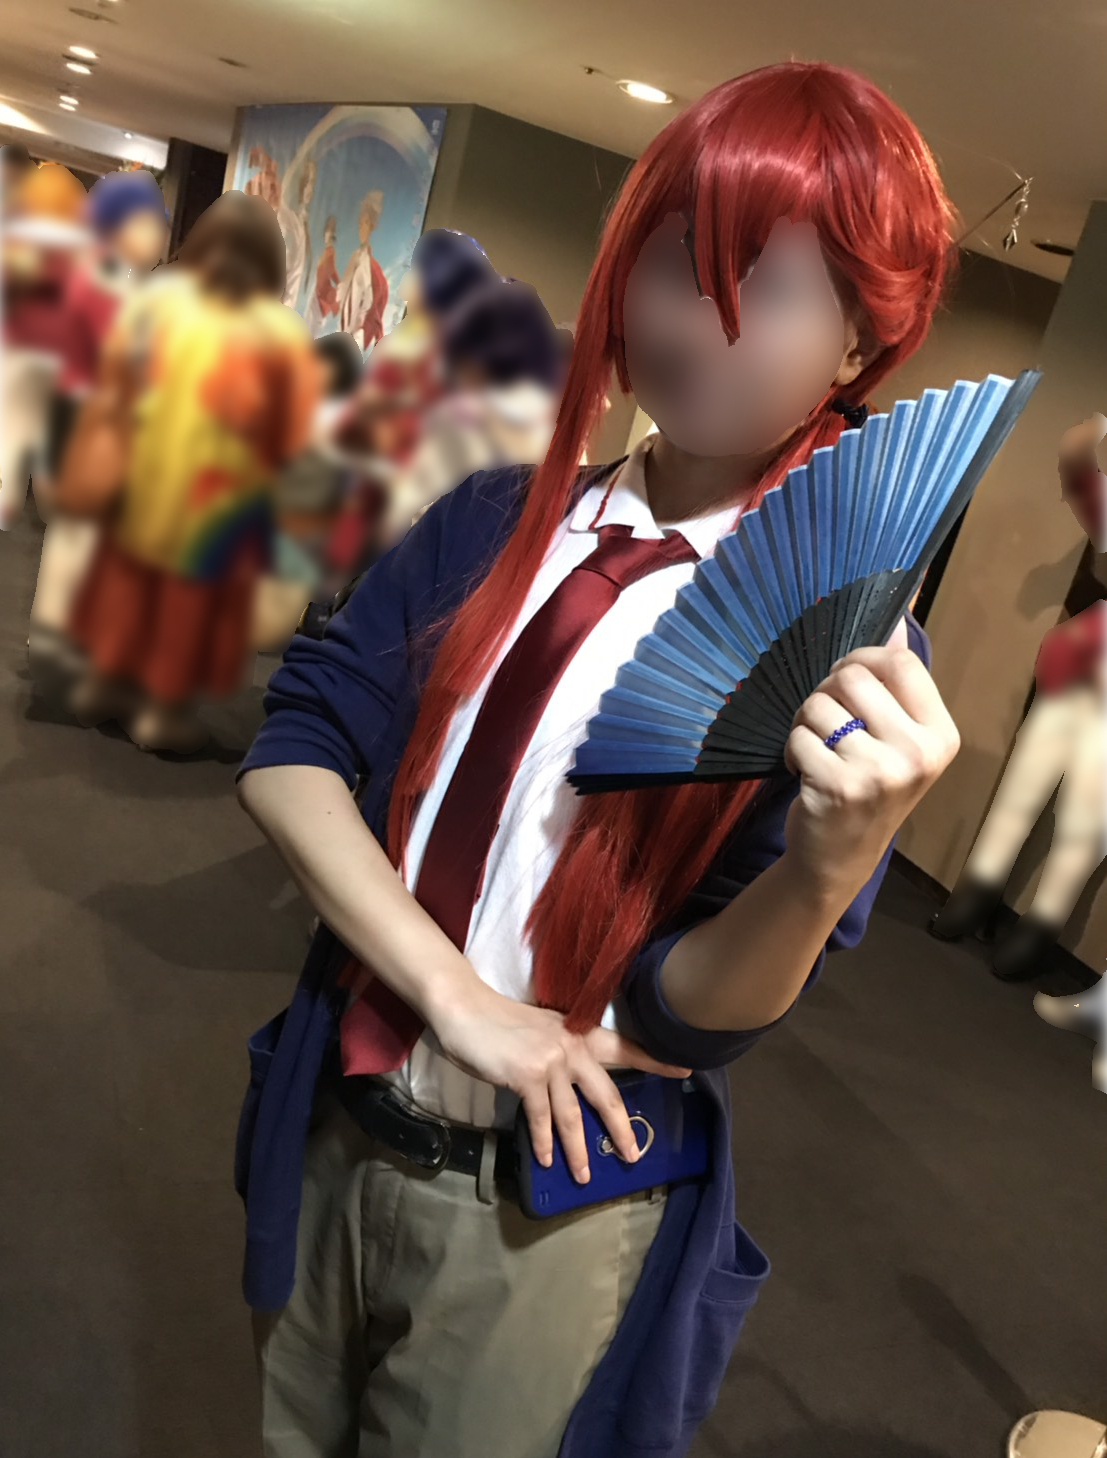 A fan whose face is blurred dressed in a red wig, white shirt, red tie, blue sweater, and tan pants, holding a fan.